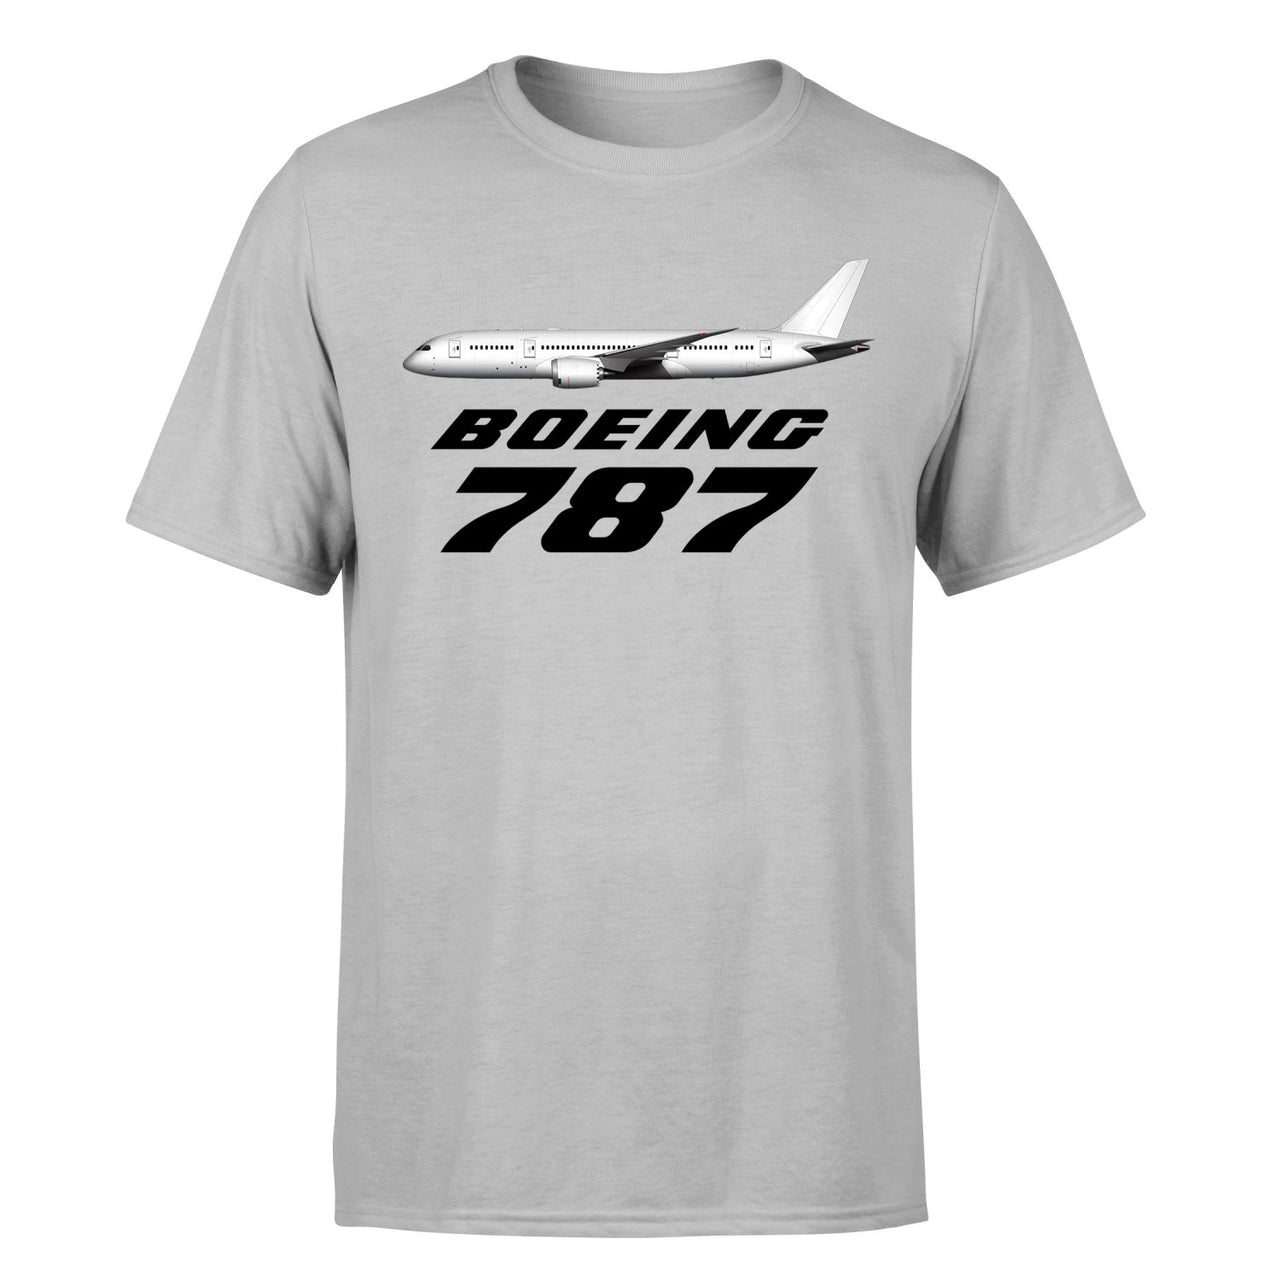 The Boeing 787 Designed T-Shirts